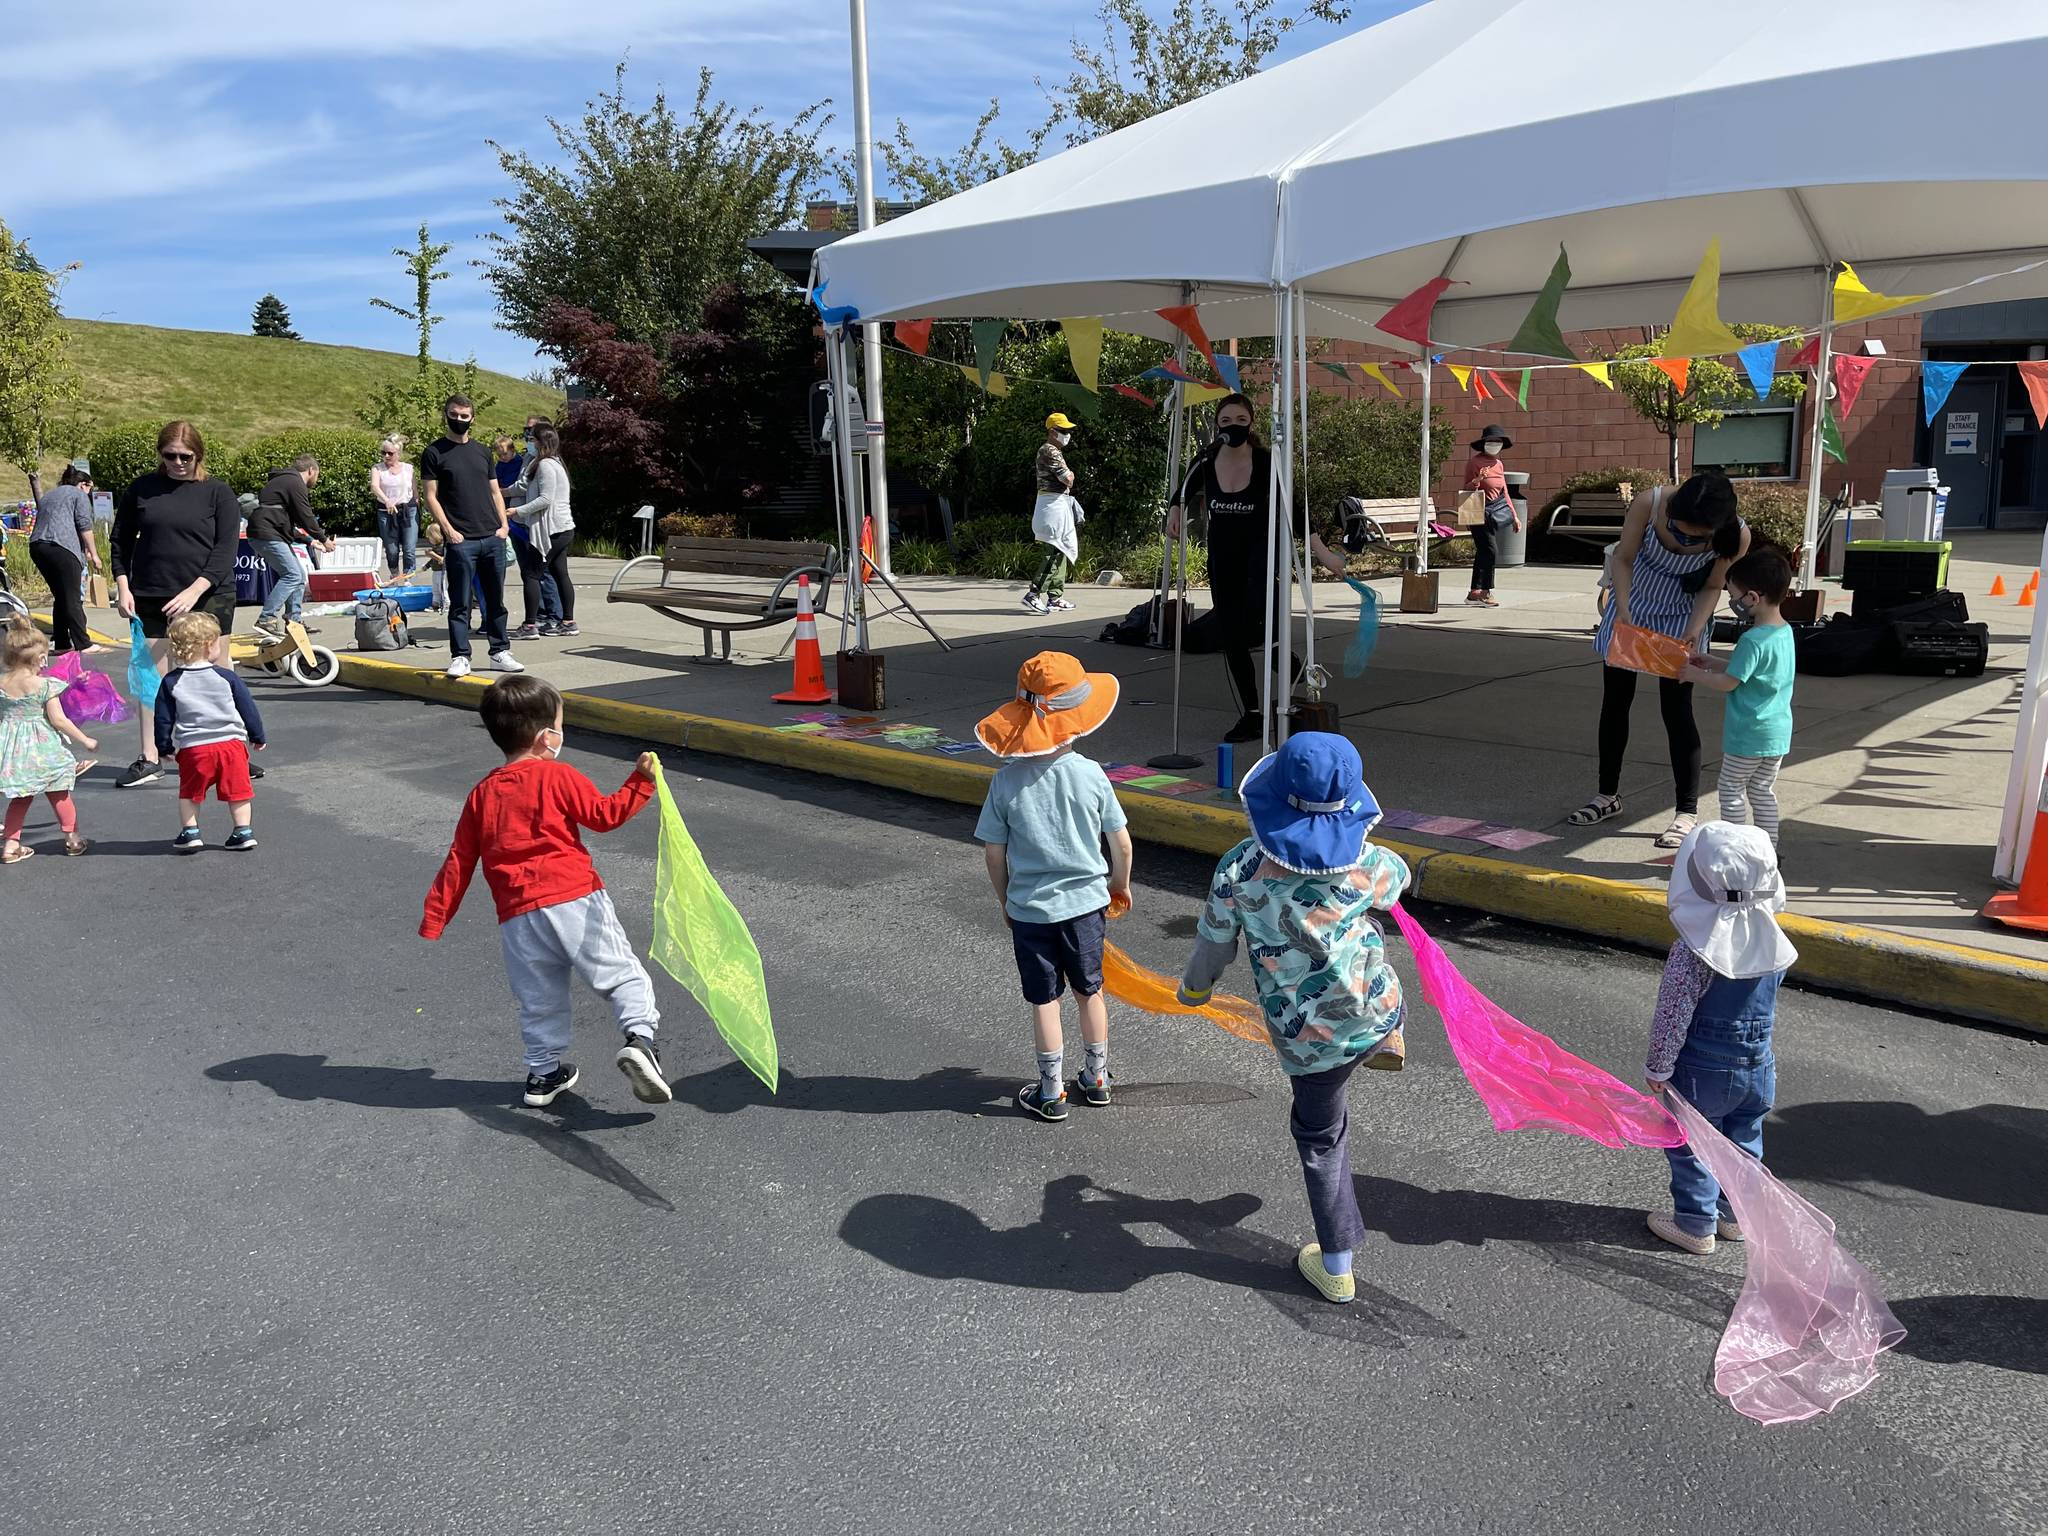 Kids flow through pop-up classes from Creation Dance Studio at the Mercer Island Preschool Association “CAR-nival” on June 12 in the Mercer Island Community & Event Center parking lot. Courtesy photo